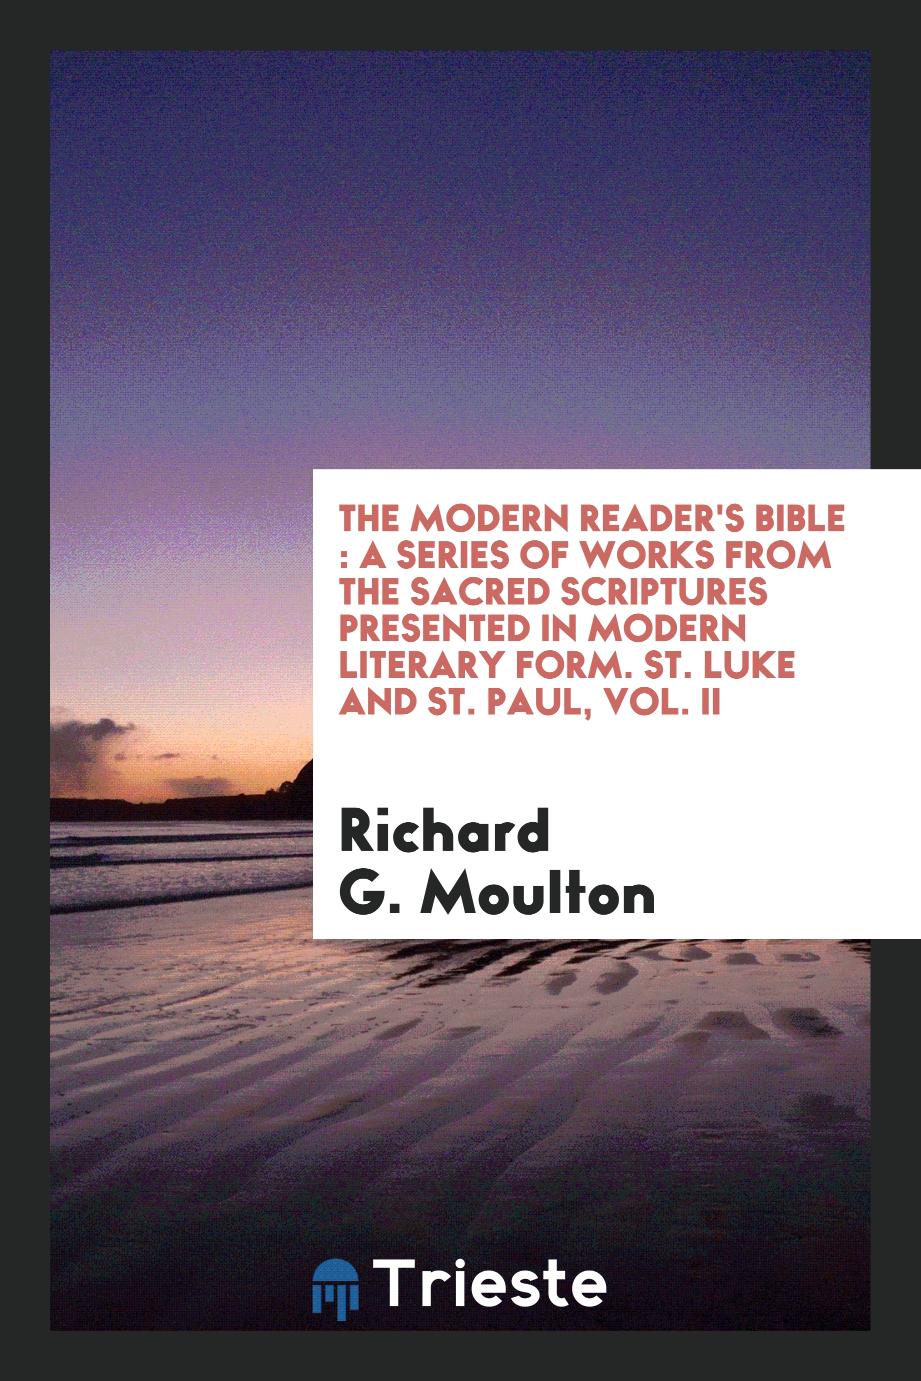 The modern reader's Bible : a series of works from the sacred Scriptures presented in modern literary form. St. Luke and St. Paul, Vol. II